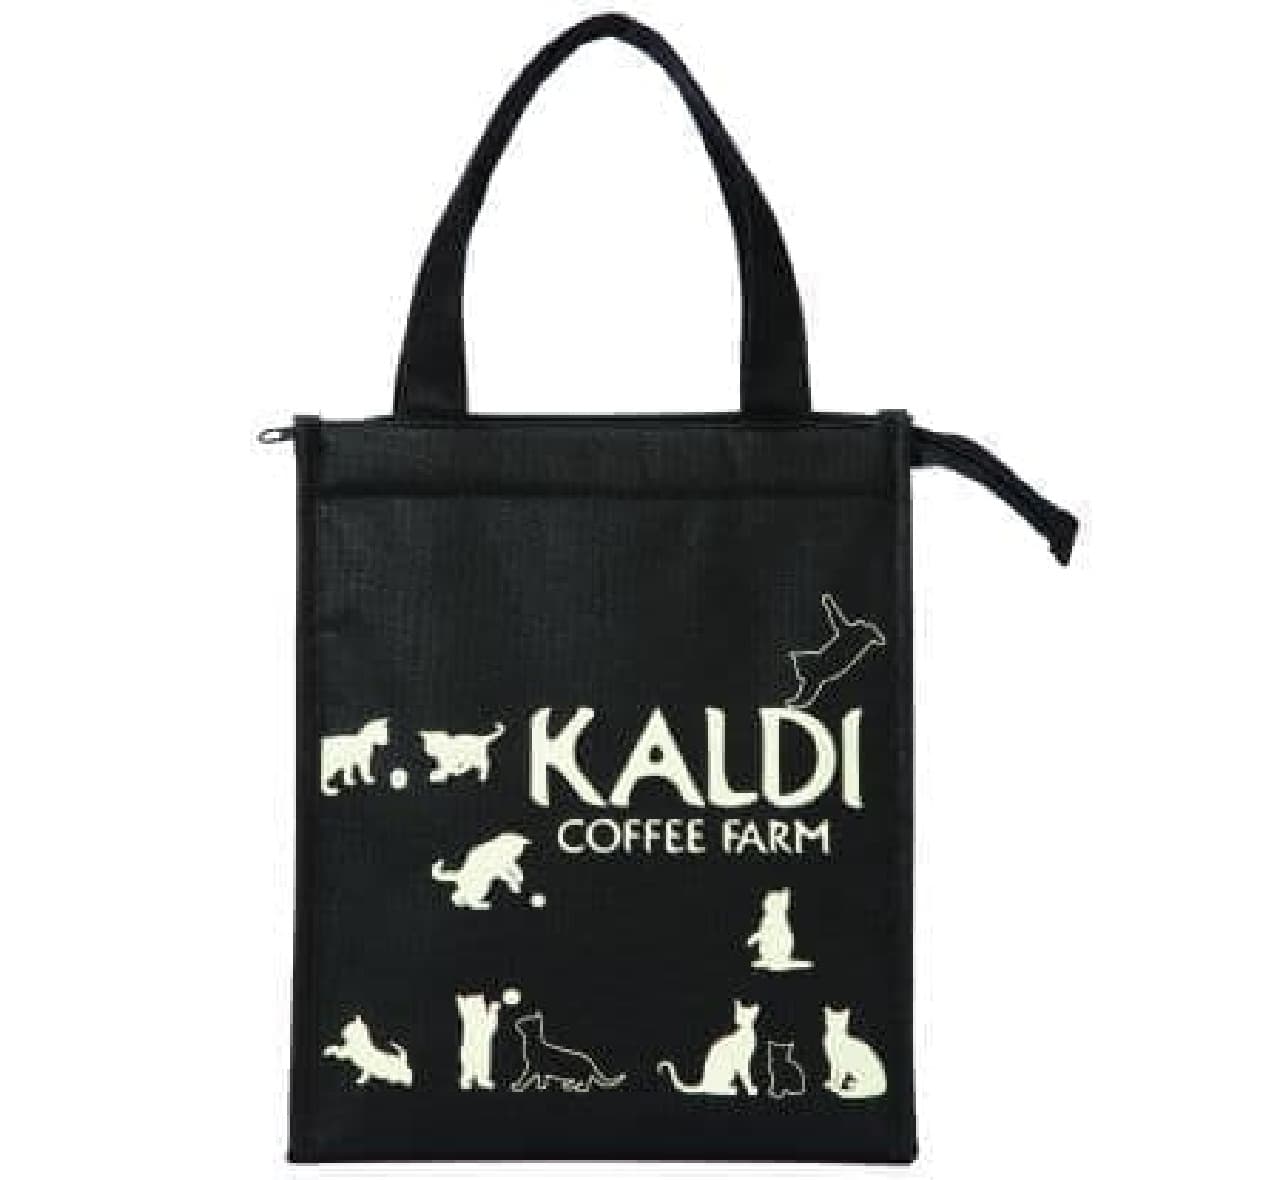 "Cat bag (cold)" is a set of cat-designed items